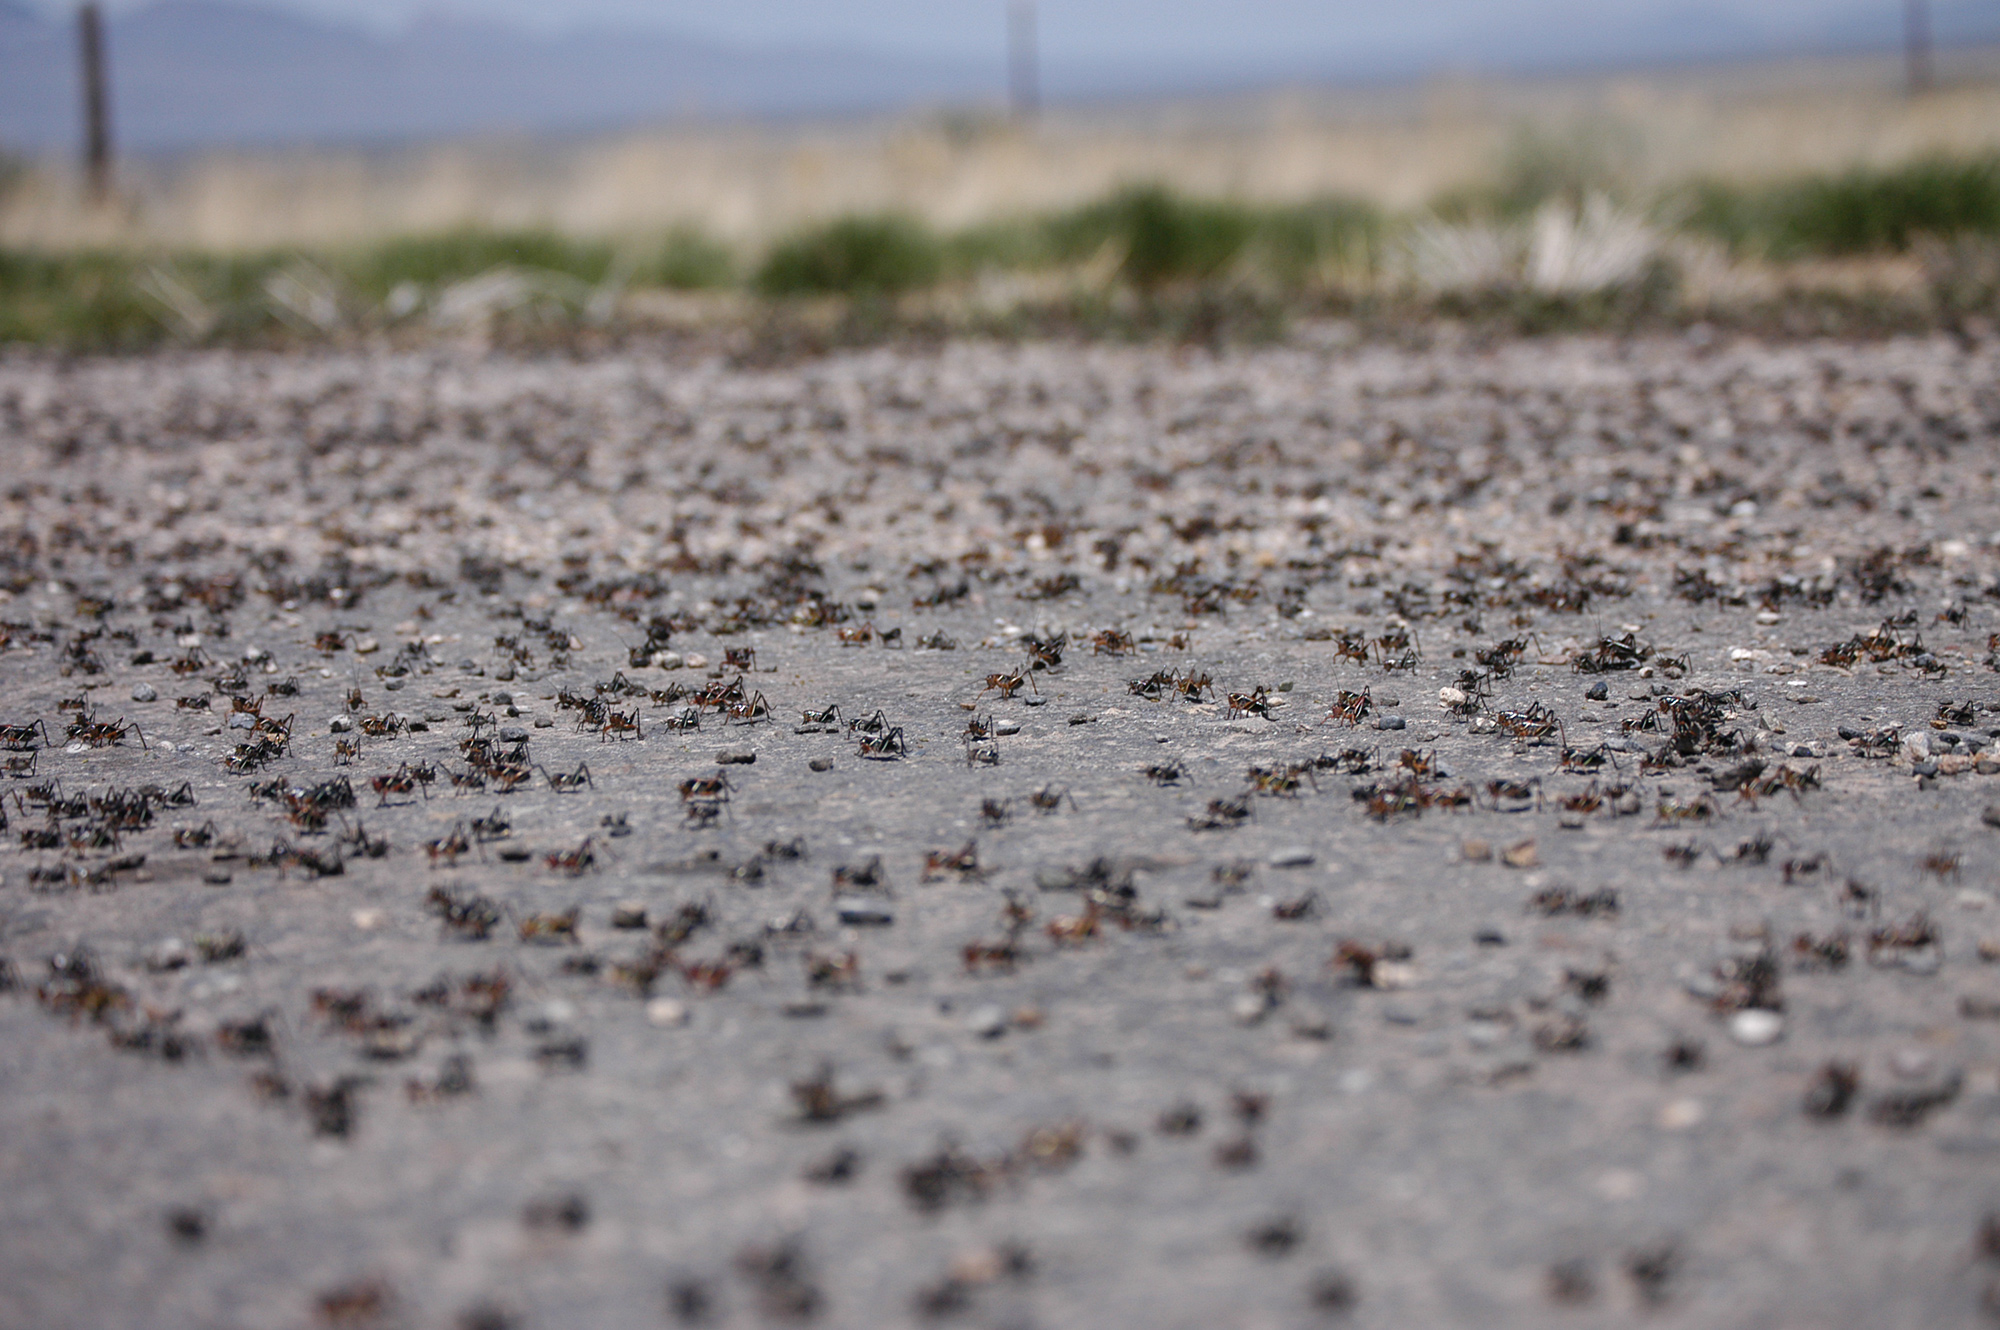 Nevada Dept of Ag reminds public to report Mormon crickets AGDAILY